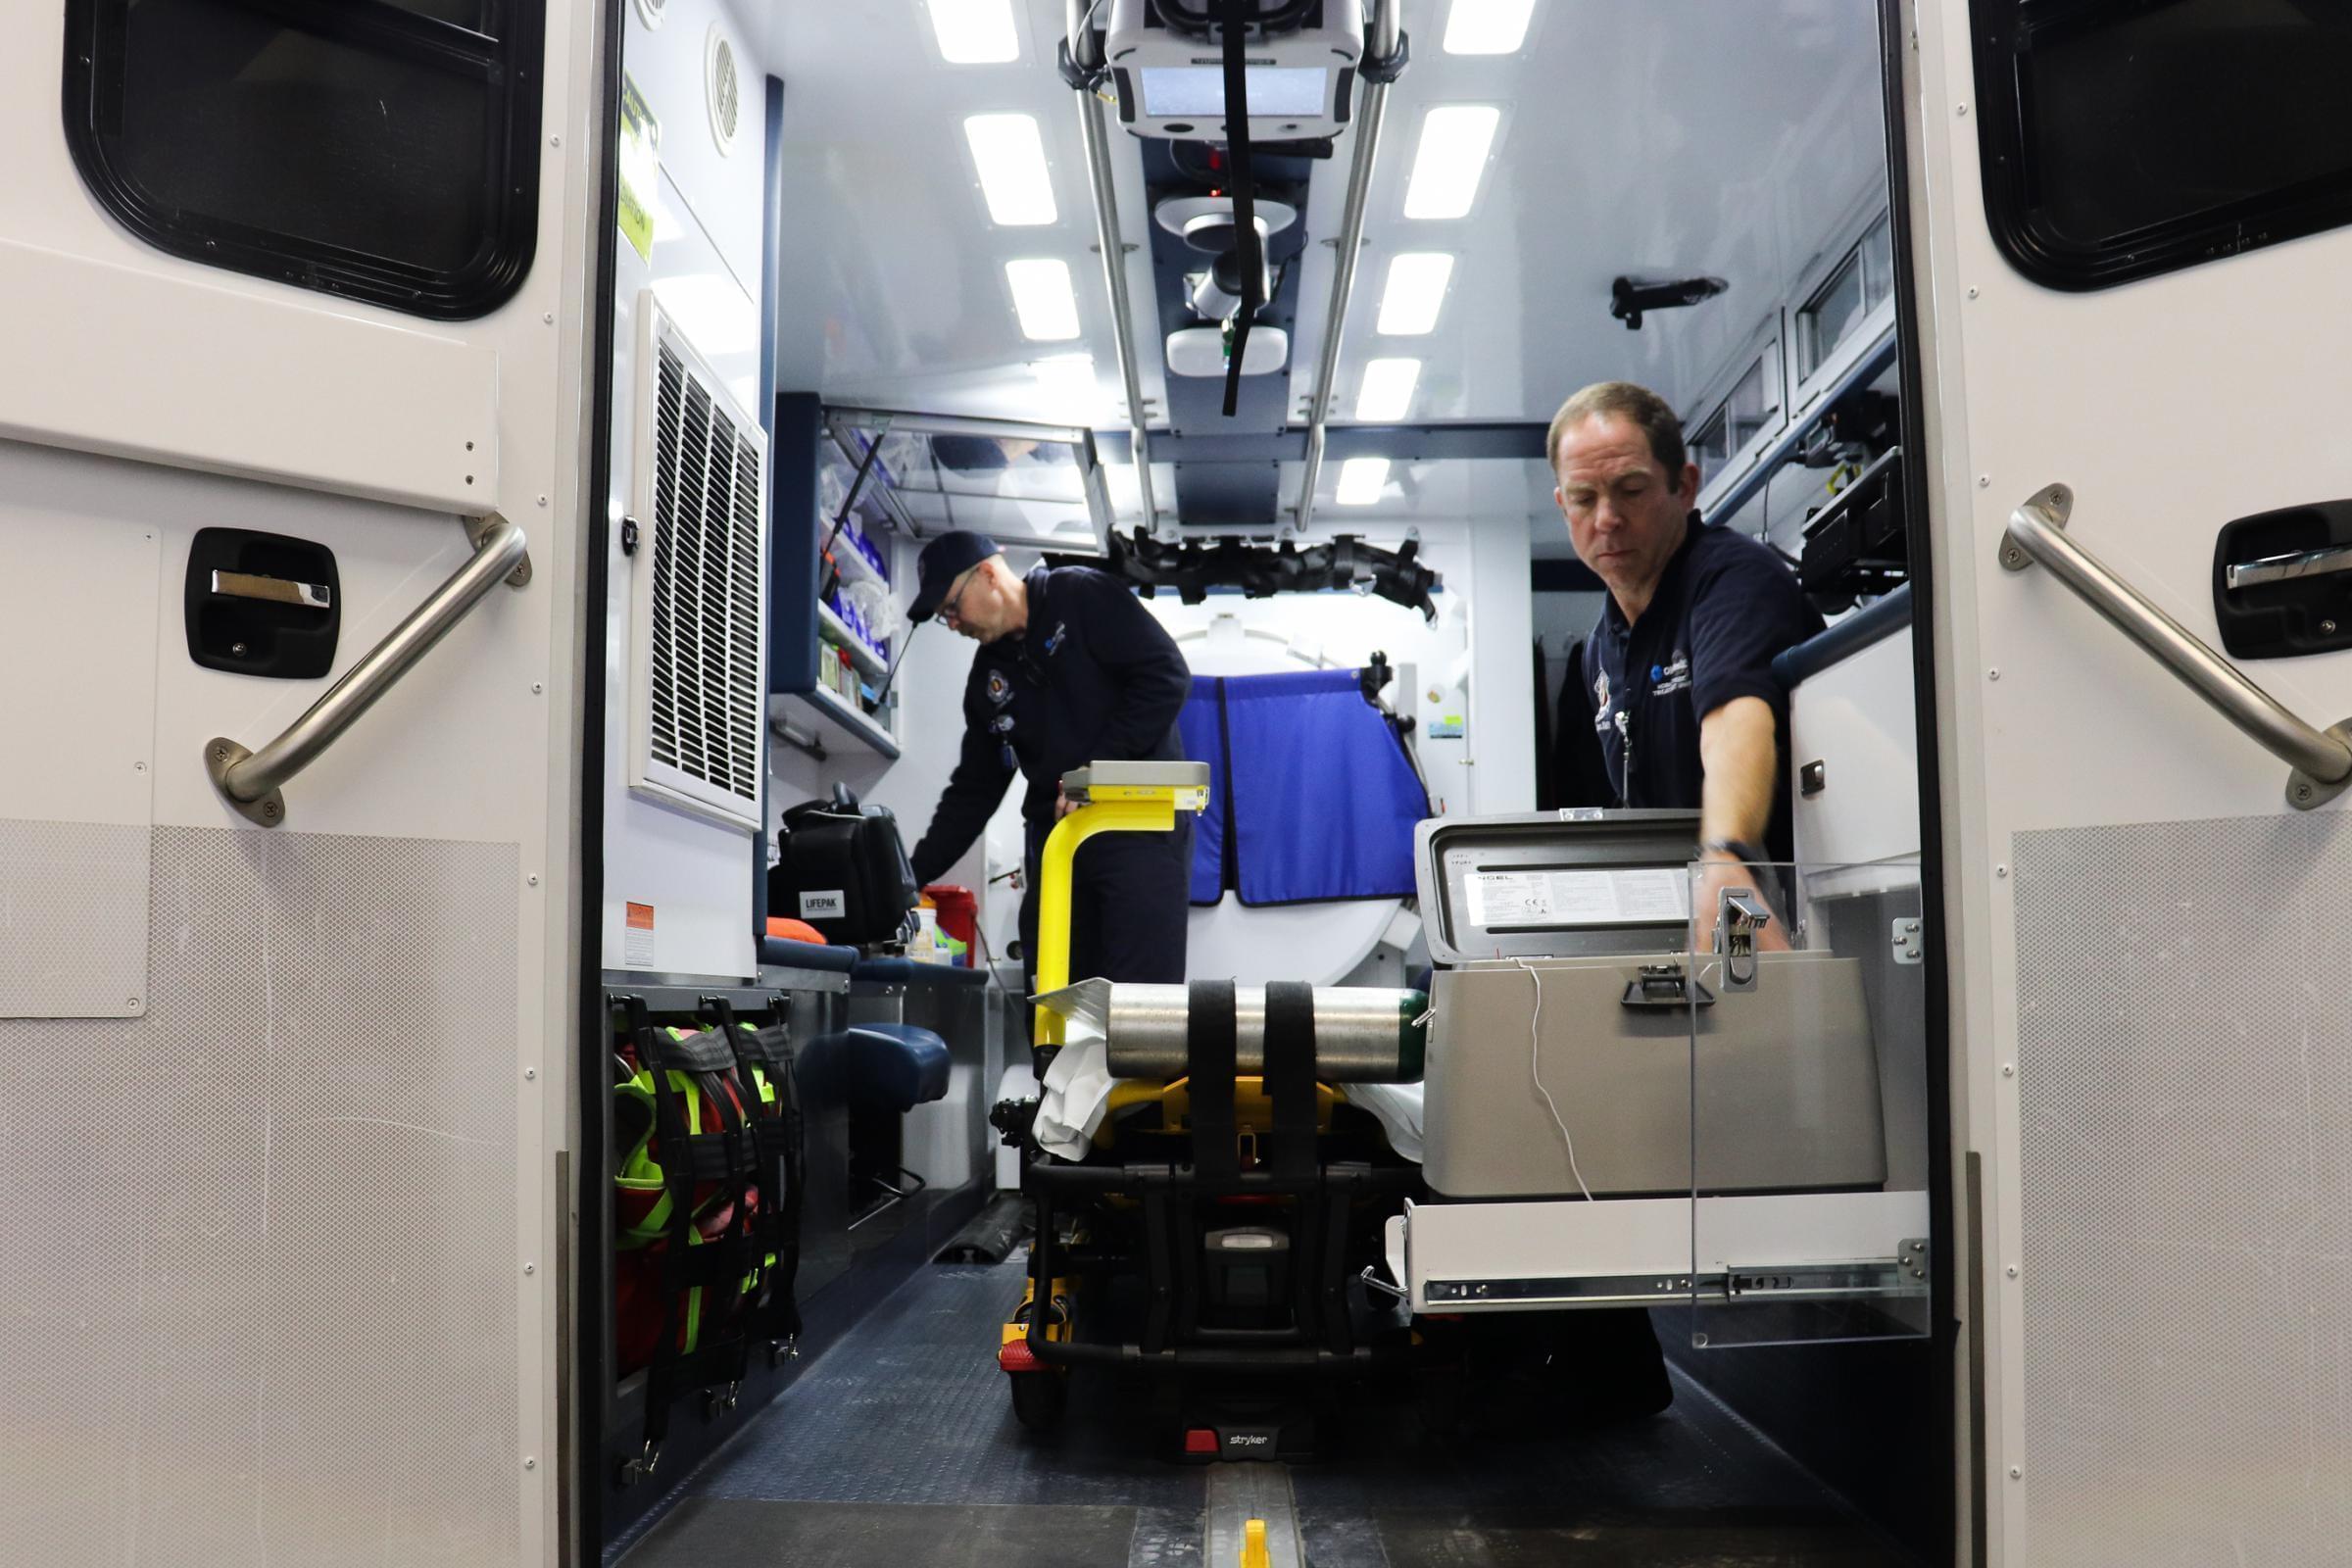 Paramedics Scott Widener and Mike Warnimont prepare the mobile stroke unit for the day.